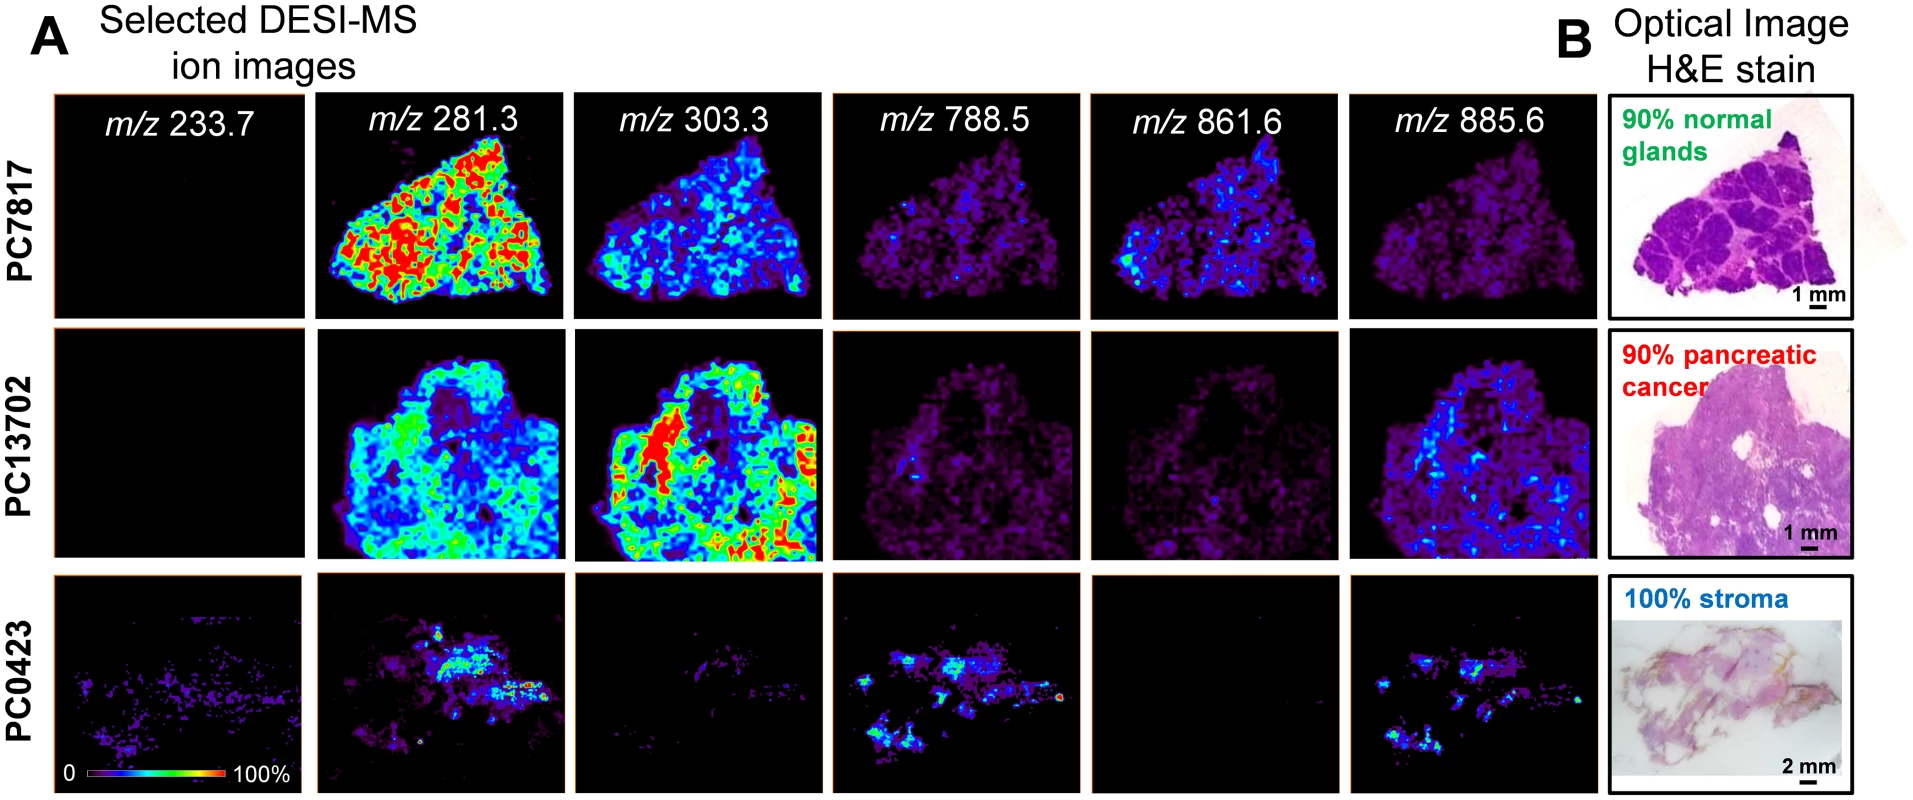 Selected 2-D negative ion mode DESI-MSI ion images obtained from pancreatic tissue samples.